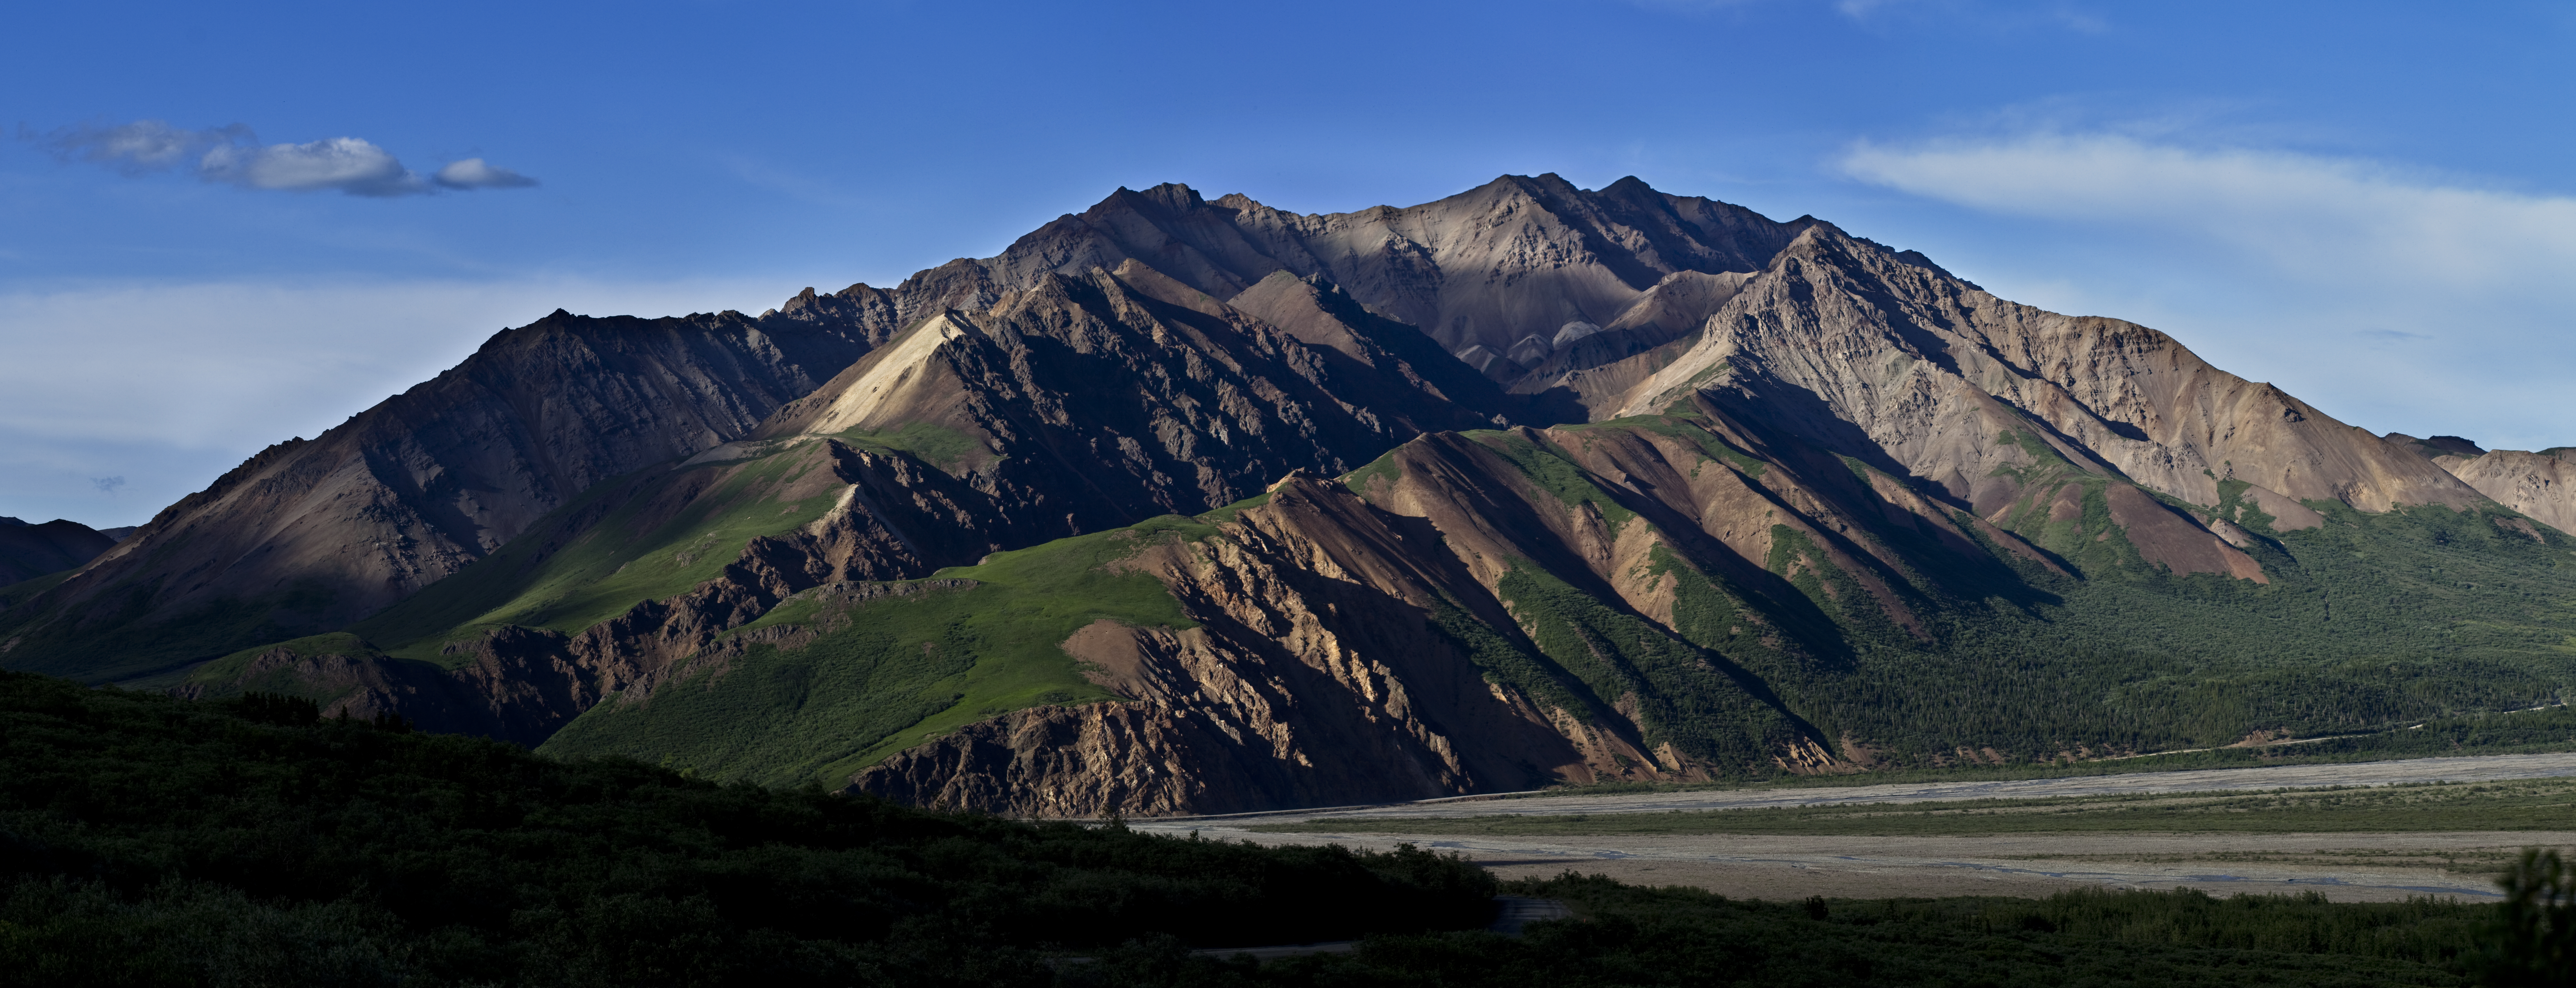 File:The Denali Park Road travels through the Outer Range and some of the  smaller mountains of the Alaska Range on its 92-mile course.  (808d4d32-8ba2-4747-98bd-c0e7ef55f2dc).jpg - Wikipedia